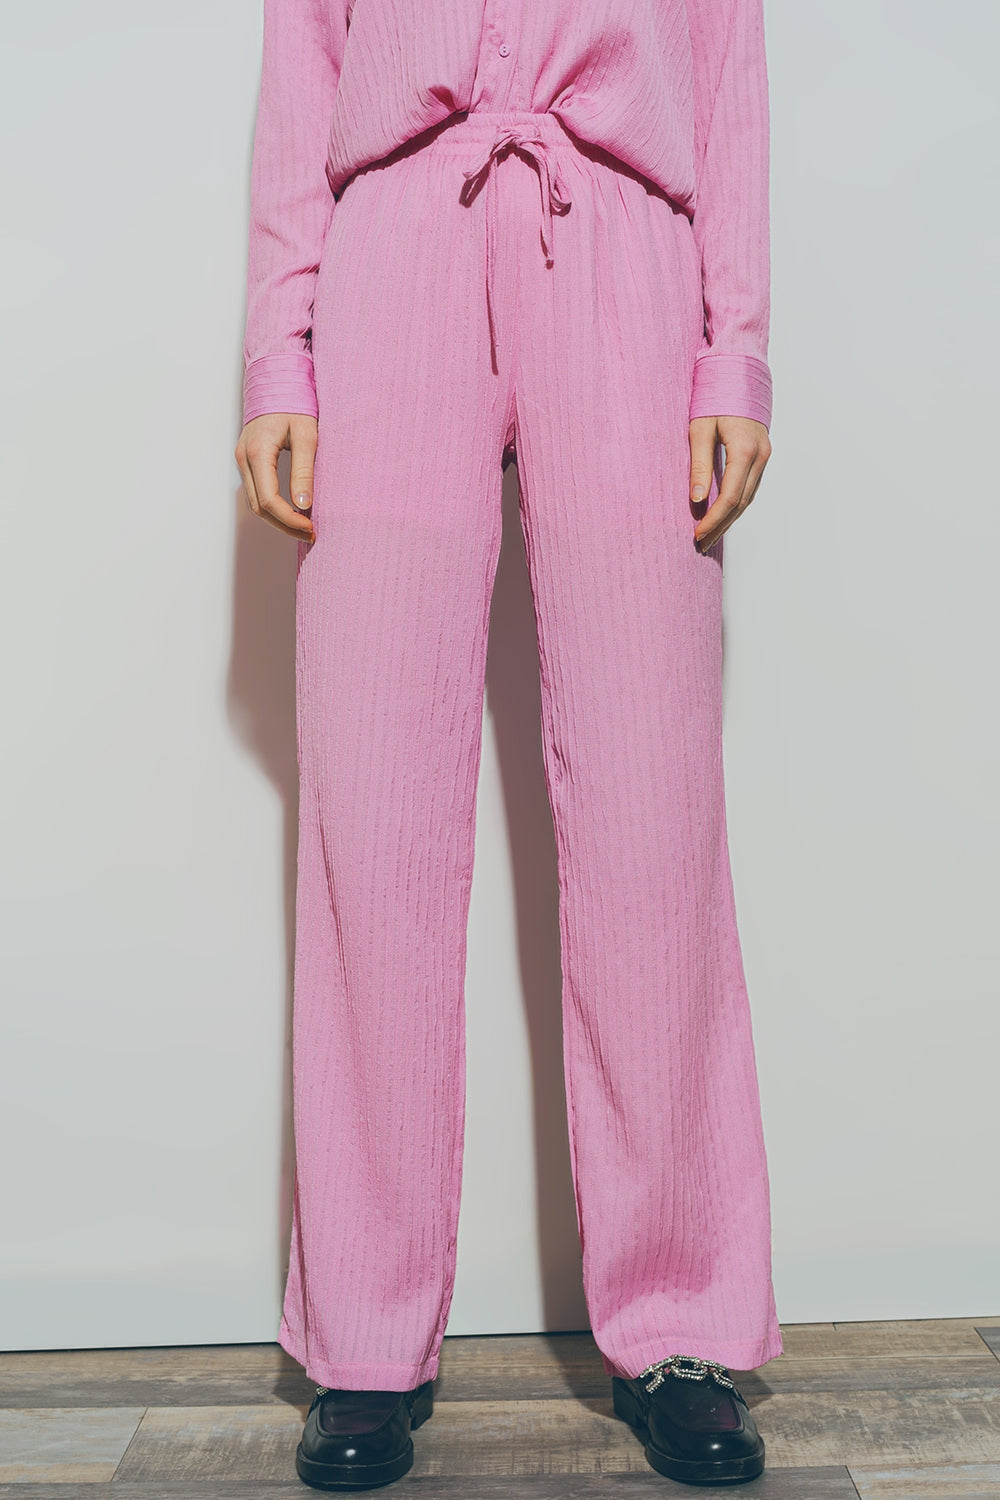 Textured Wide Leg Pants in Pink